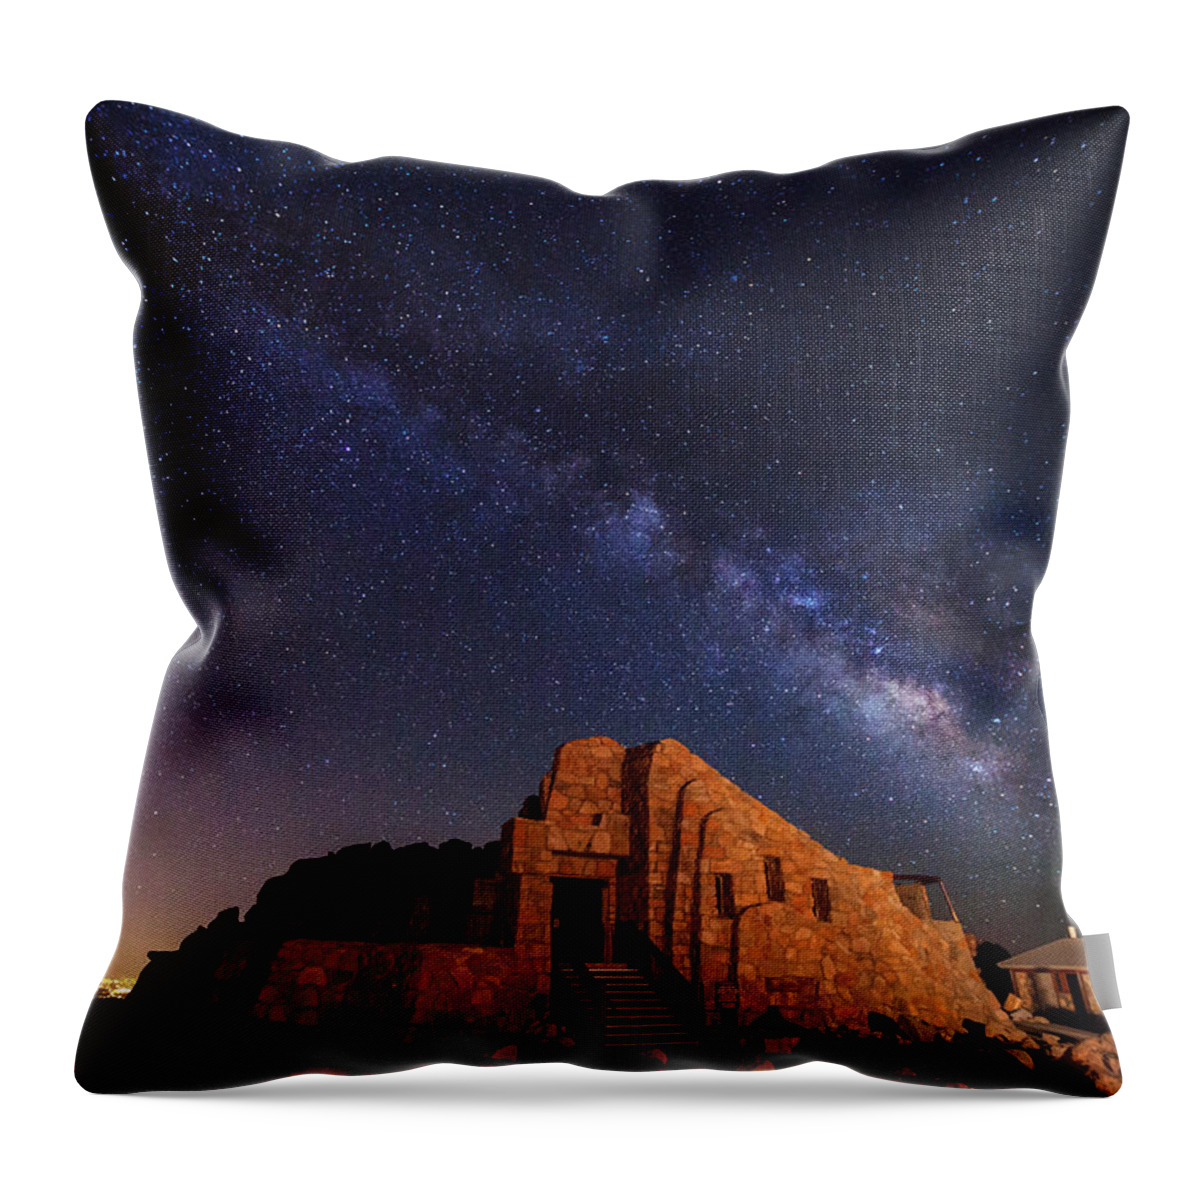 Night Photography Throw Pillow featuring the photograph Crest House Milky Way by Darren White